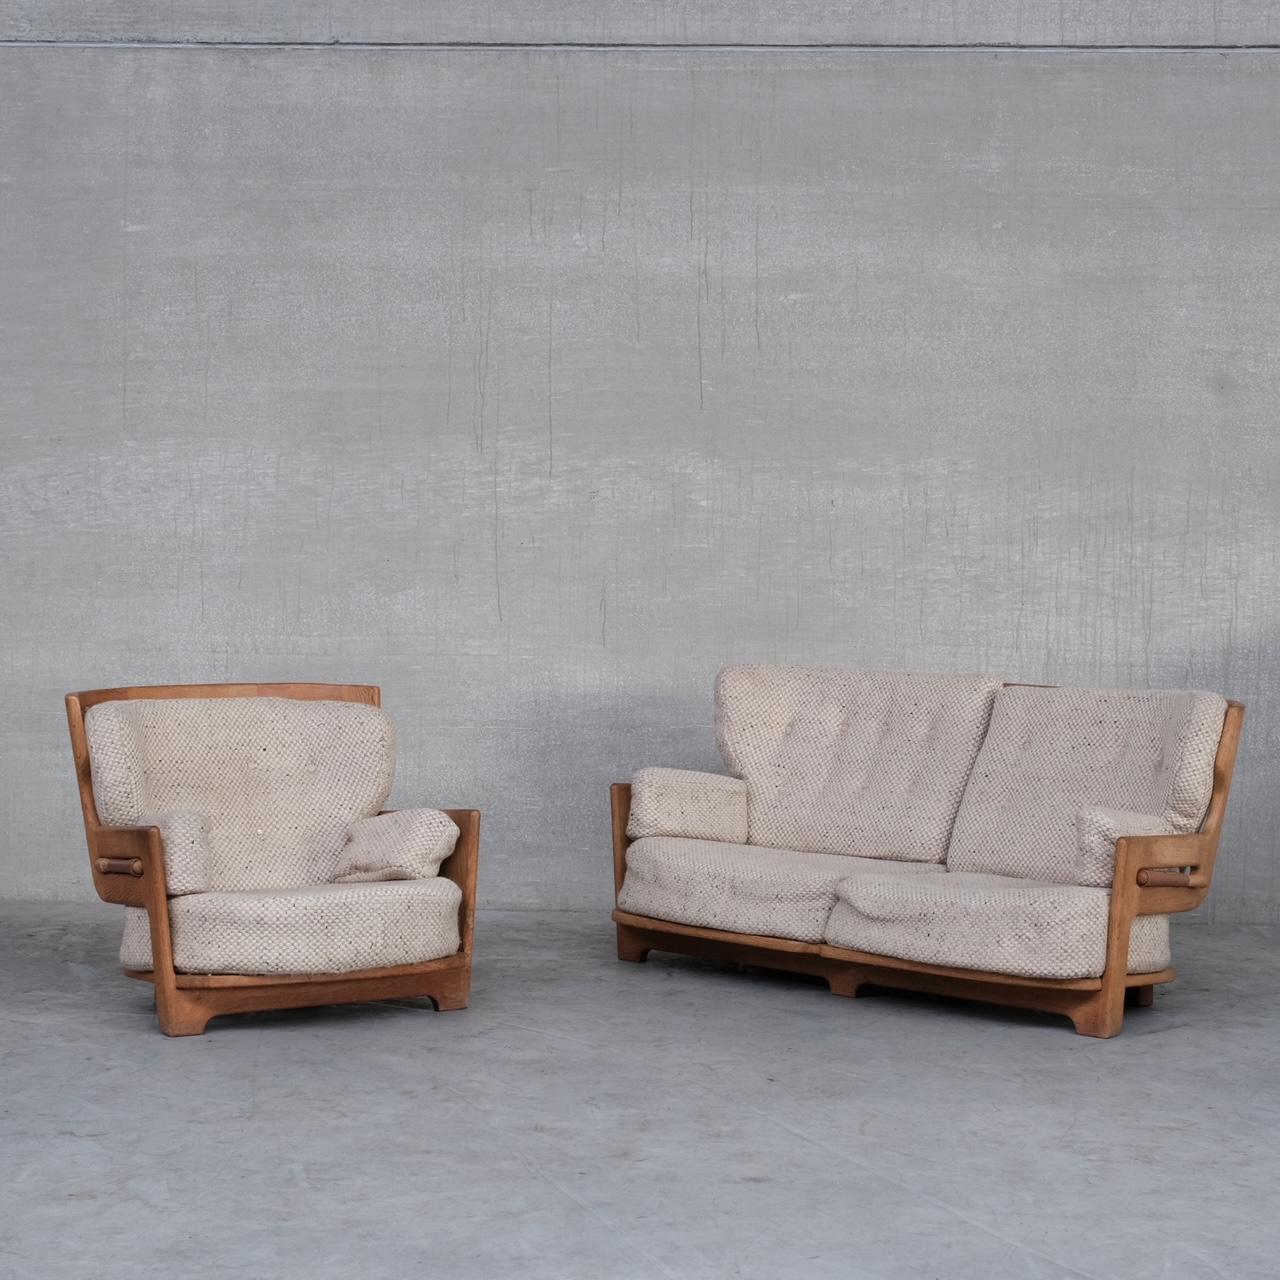 An increasingly scarce sofa and armchair set by French design legends, Guillerme et Chambron. 

France, c1960s. 

'Denis' Model. 

These look amazing upholstered in shearling, the fabric is original but wants updating, priced